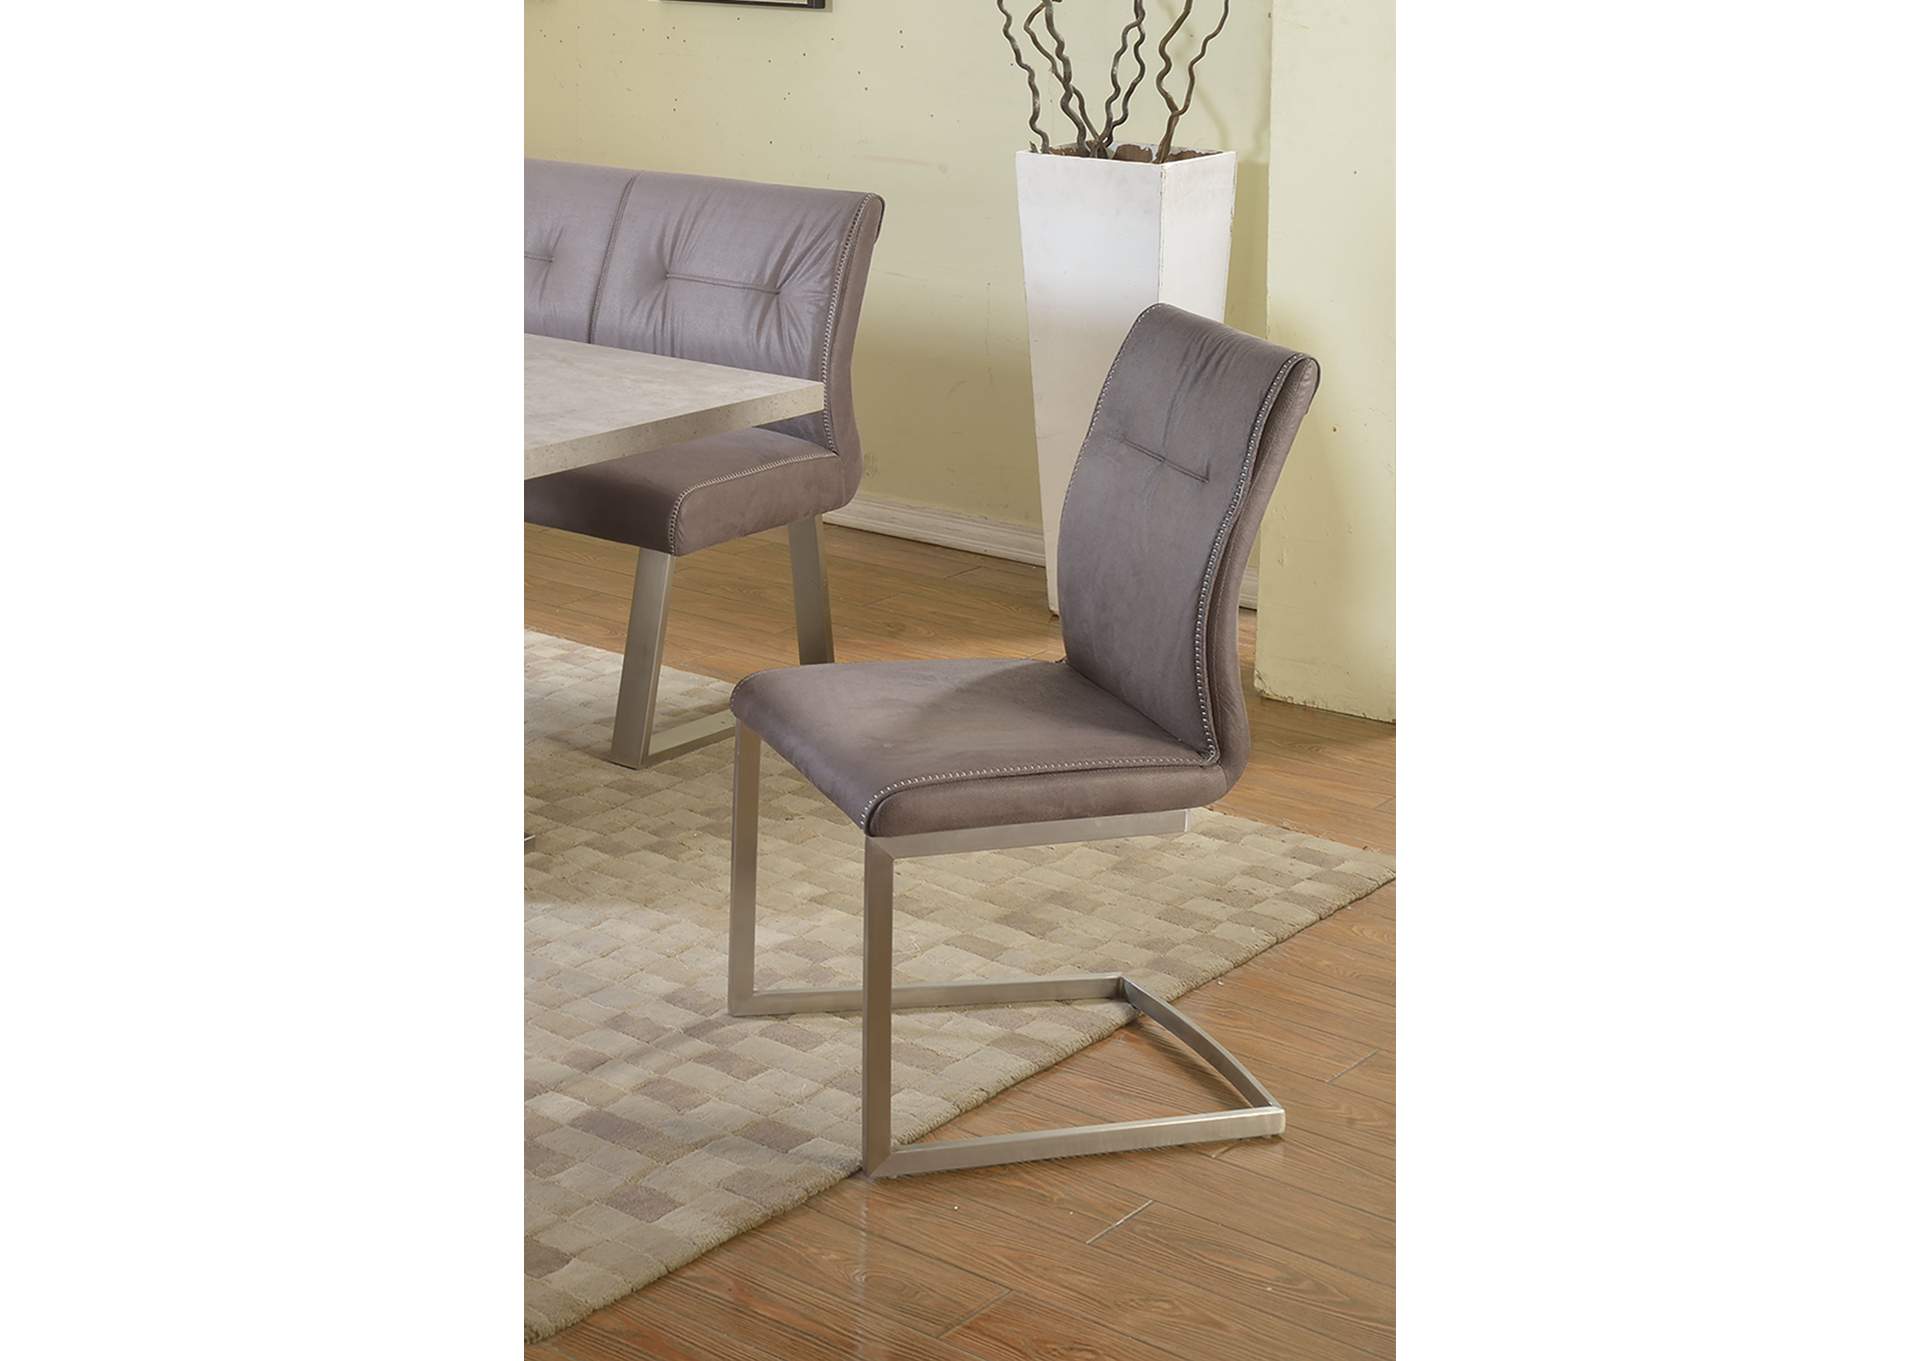 Kalinda Brushed Stainless Steel Contemporary Cantilever Side Chair w/ Highlight Stitching [Set of 2],Chintaly Imports